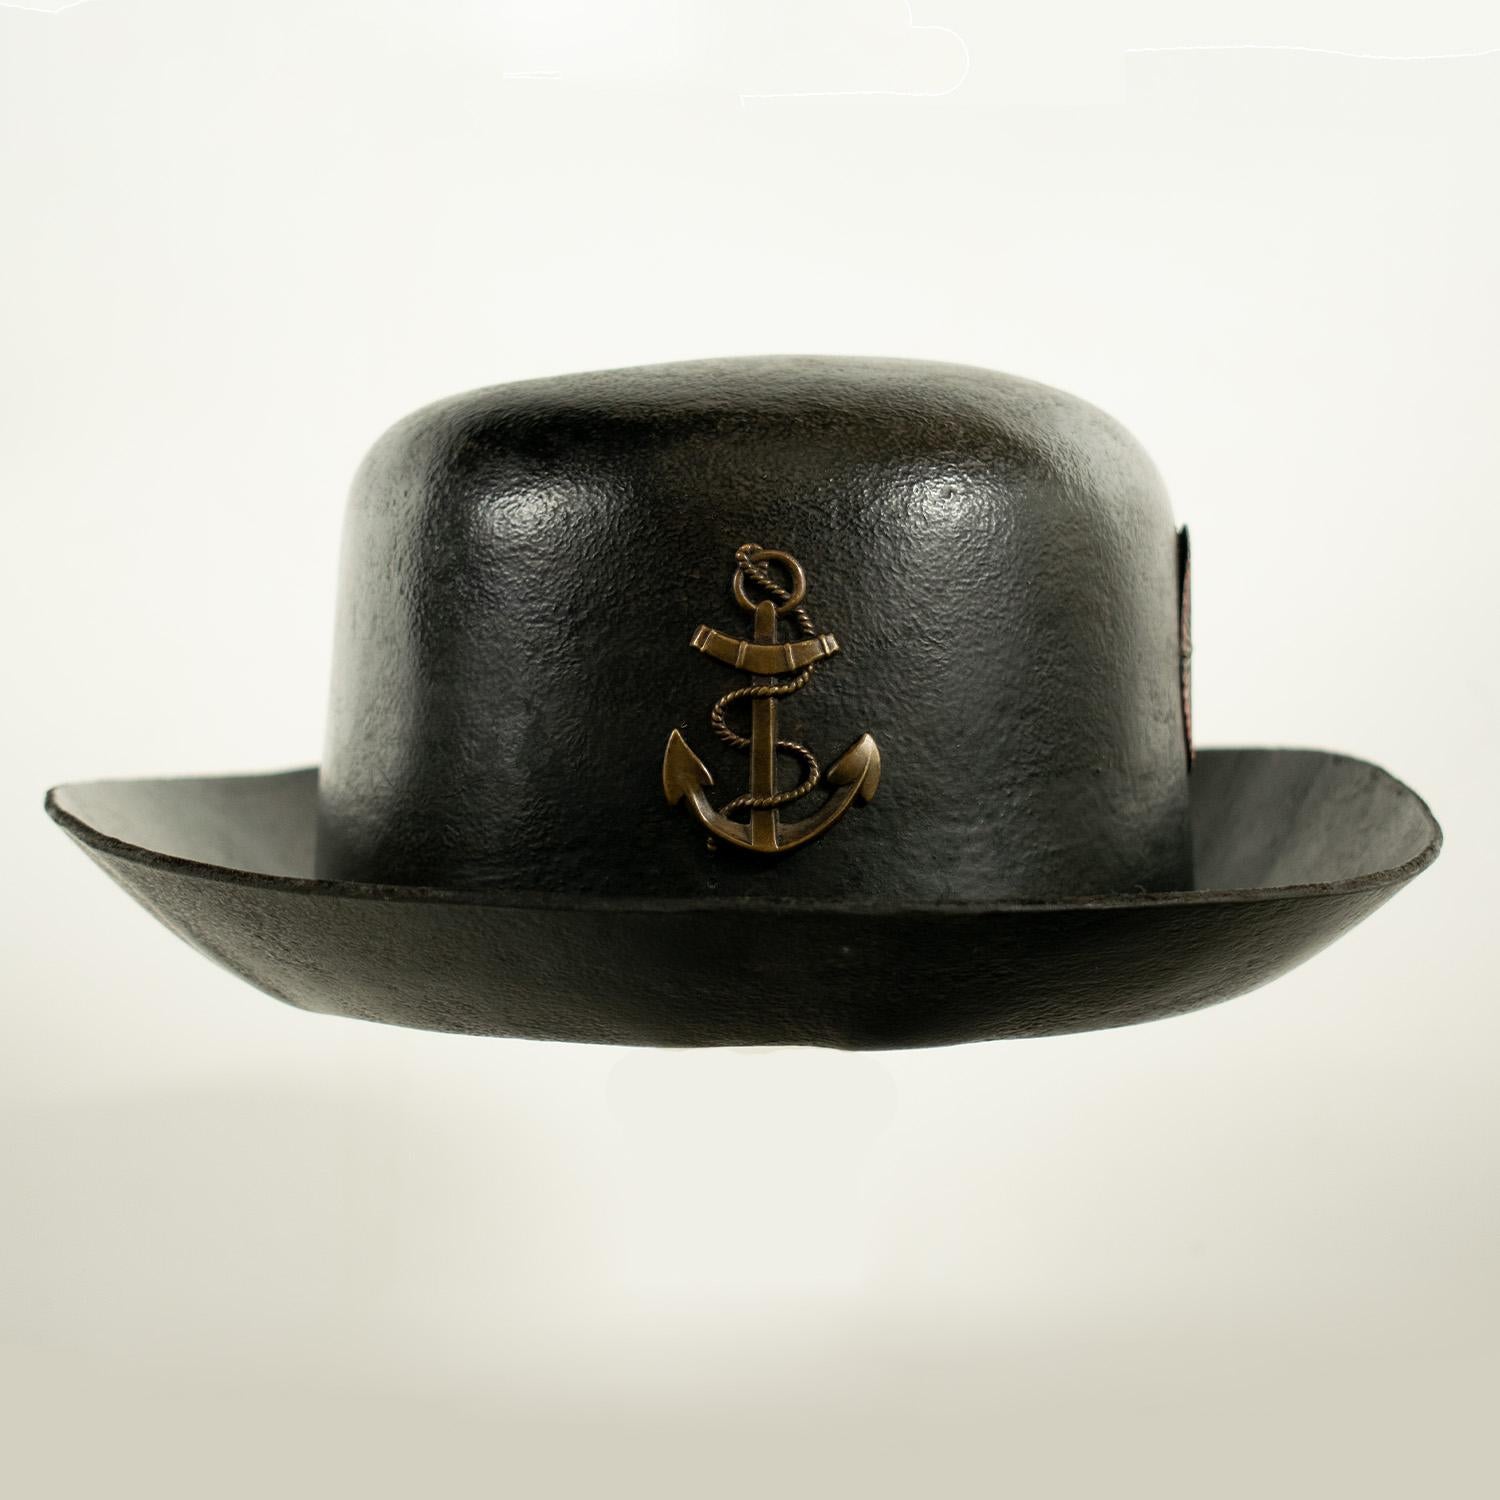 19th Century RARE FRENCH SEAMAN'S TAR HAT - early 19th century. For Sale